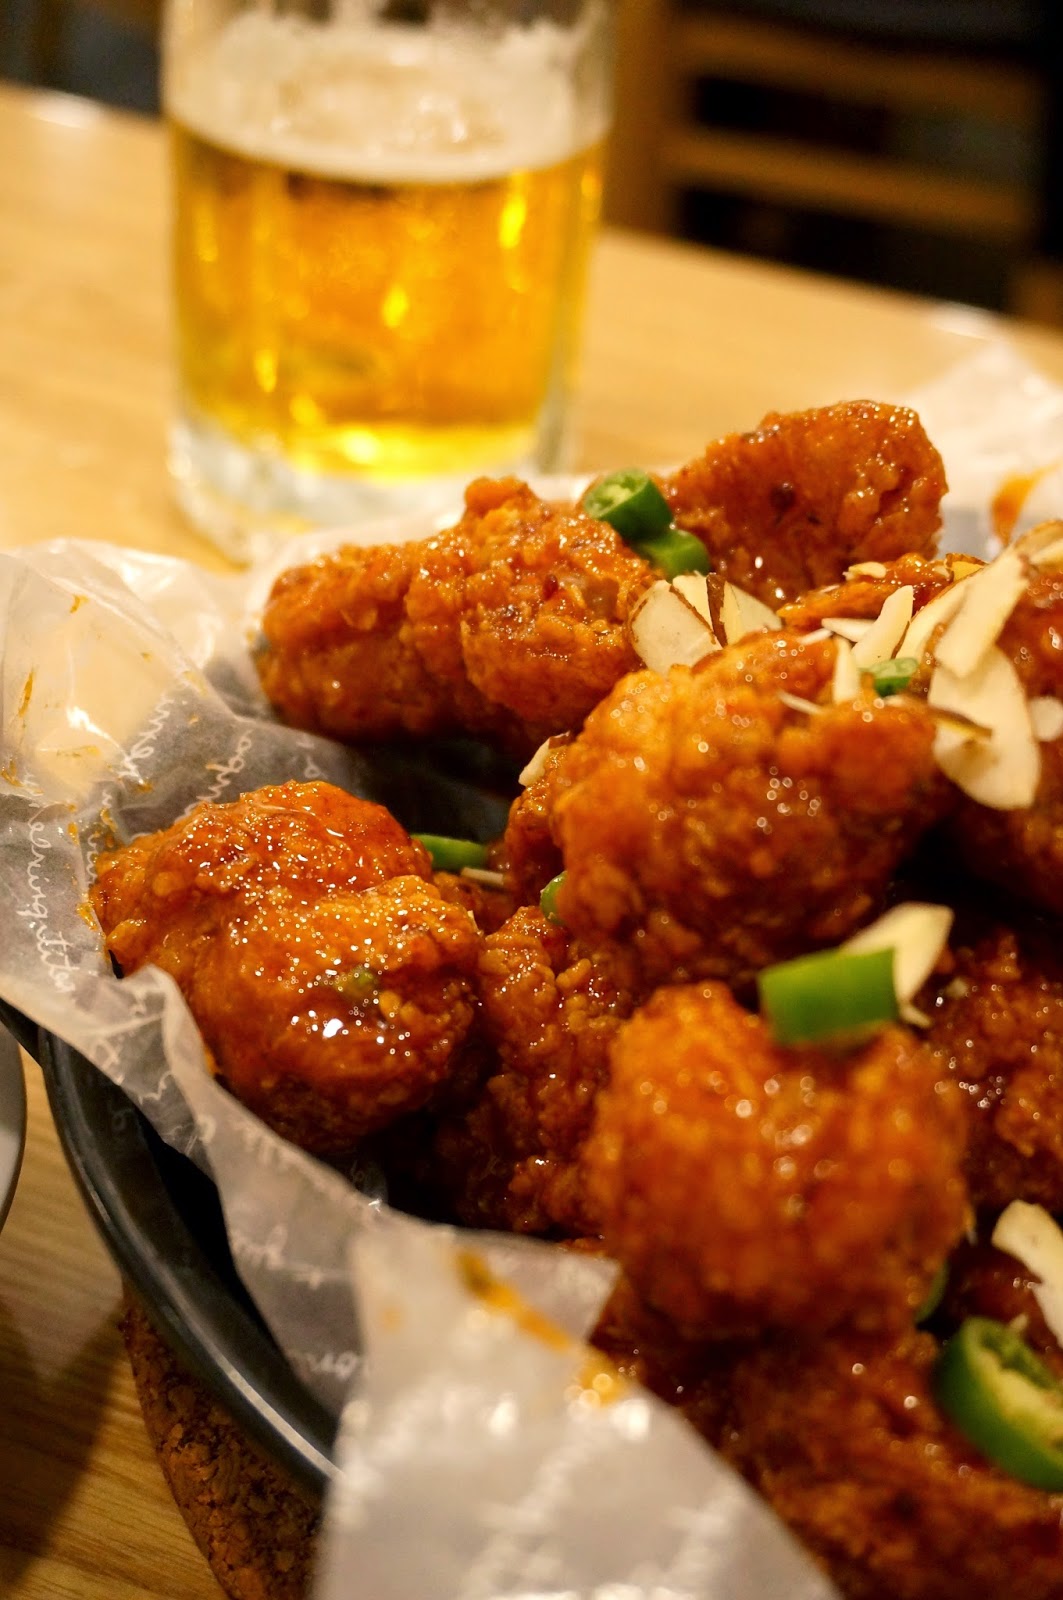 Multicultural Retail 360 | South Koreans Embrace Beer and Fried Chicken